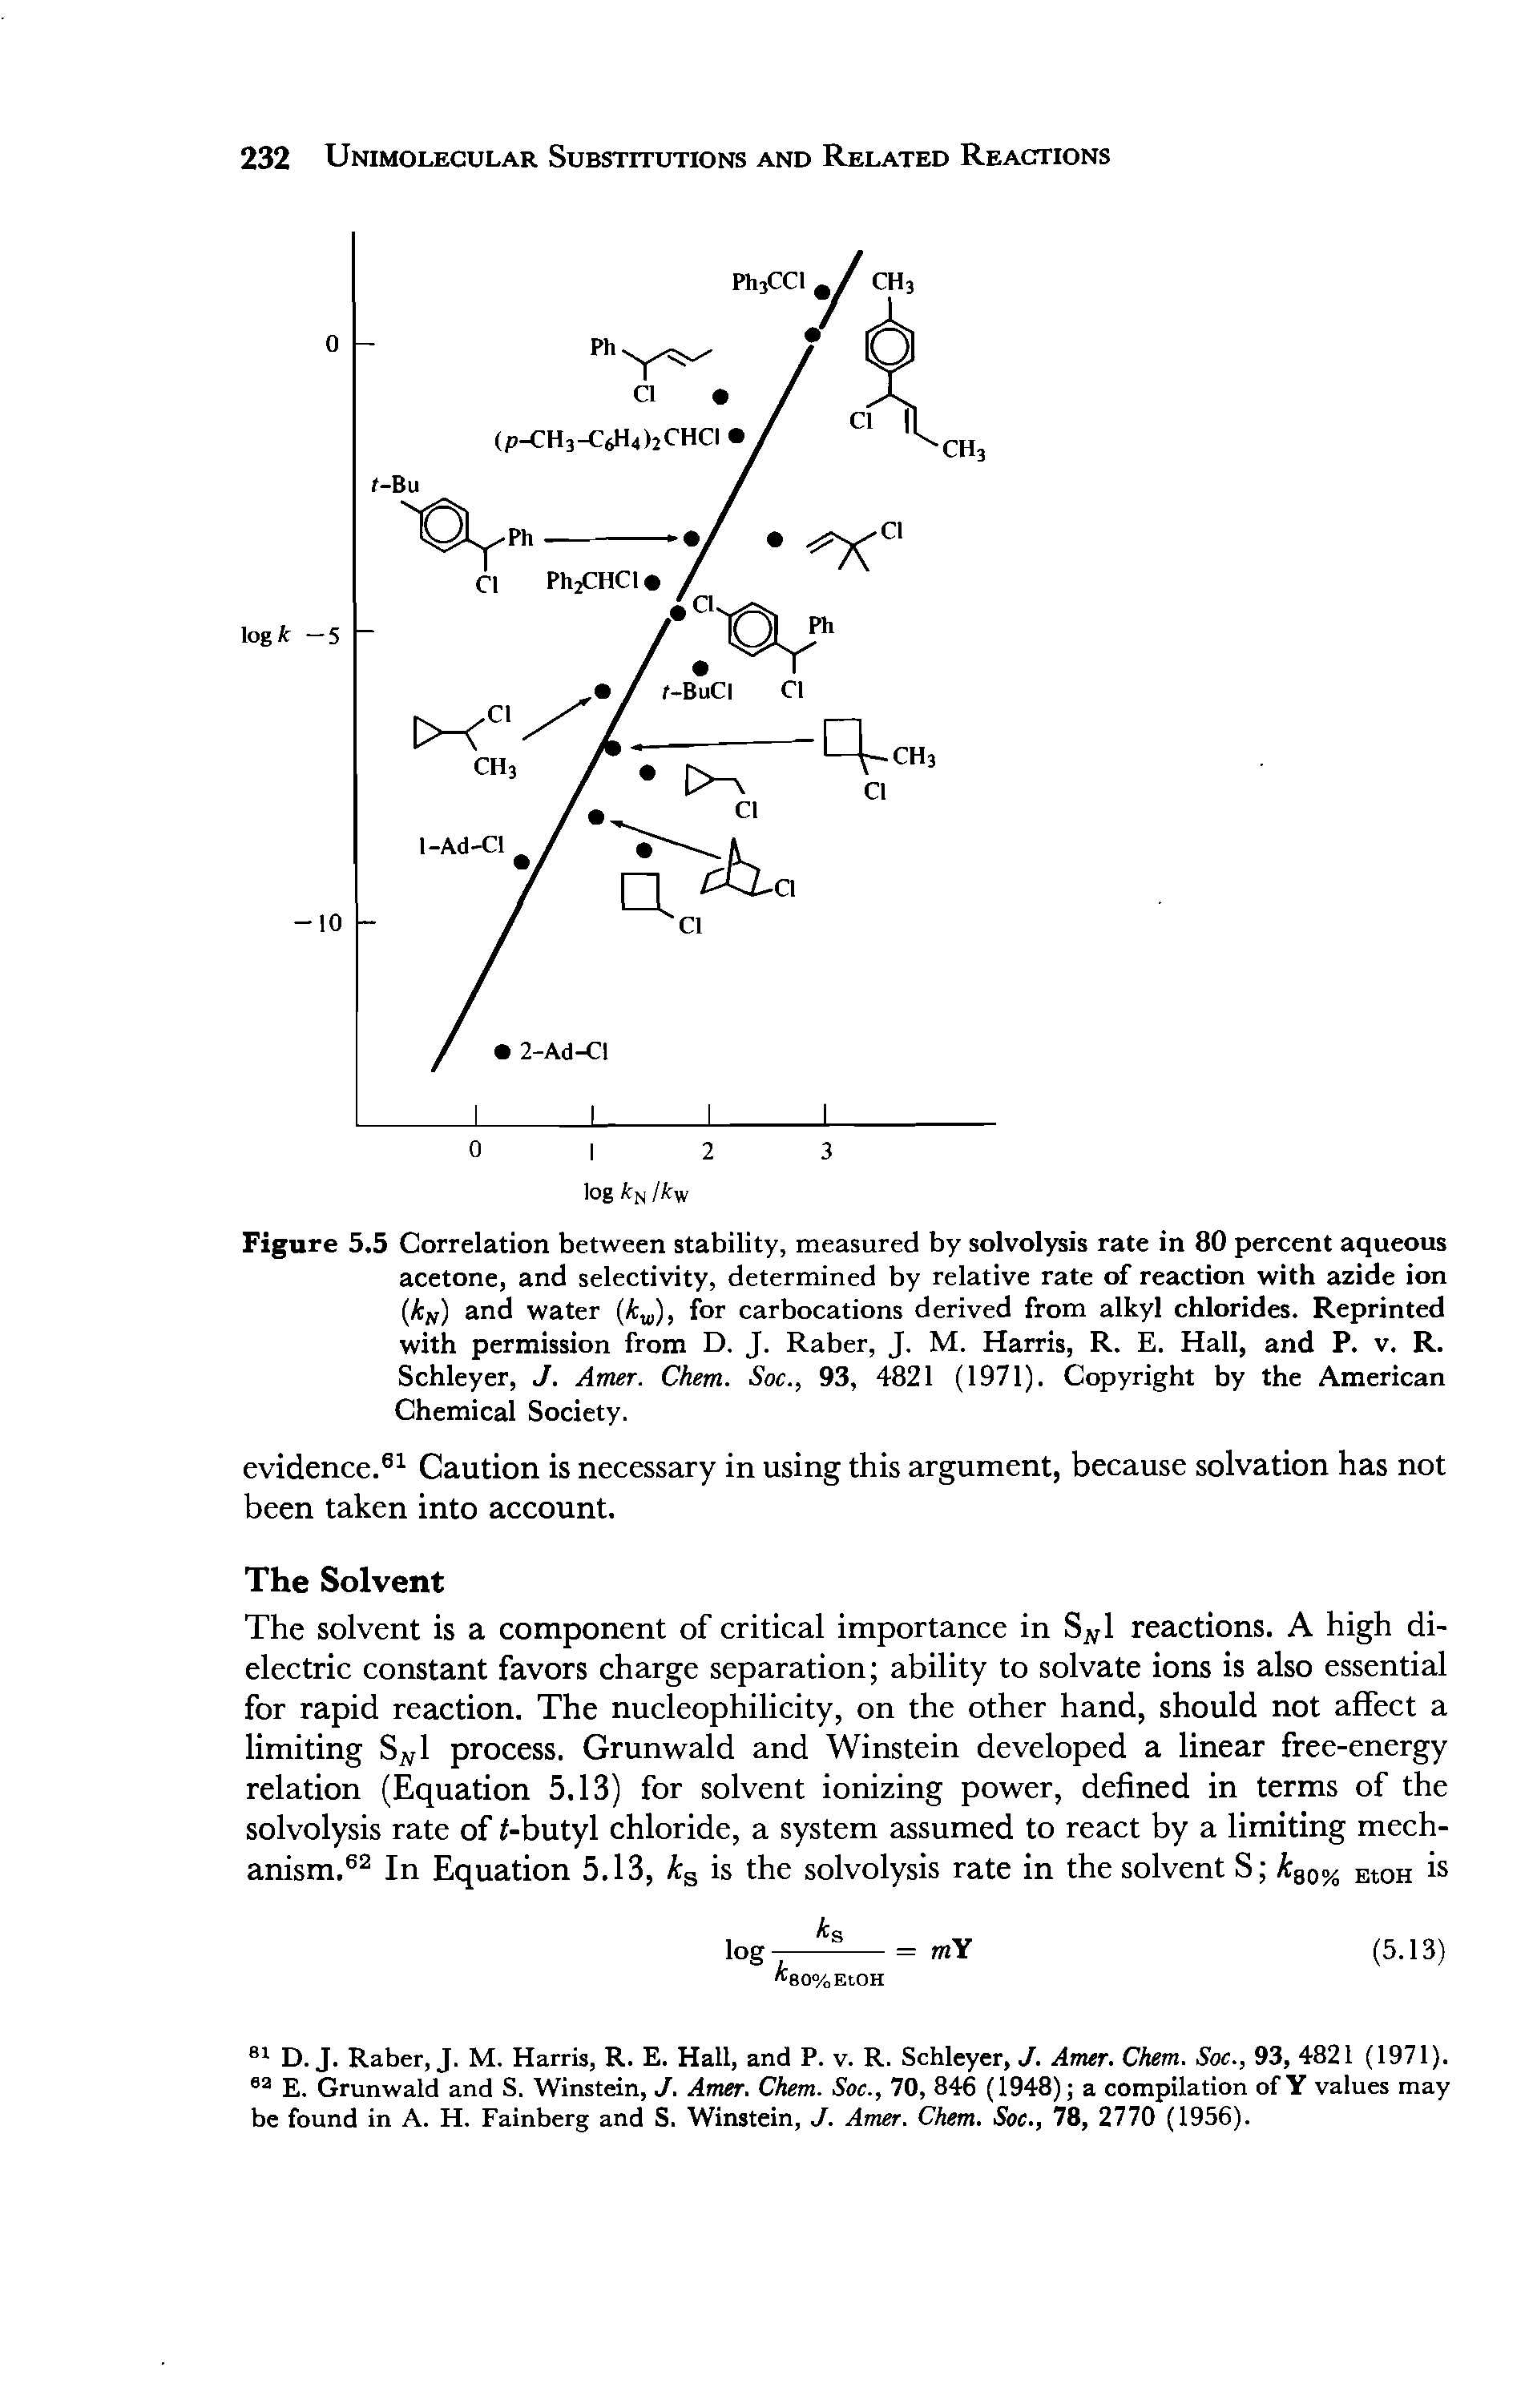 Figure 5.5 Correlation between stability, measured by solvolysis rate in 80 percent aqueous acetone, and selectivity, determined by relative rate of reaction with azide ion (kN) and water (kw), for carbocations derived from alkyl chlorides. Reprinted with permission from D. J. Raber, J. M. Harris, R. E. Hall, and P. v. R. Schleyer, J. Amer. Chem. Soc., 93, 4821 (1971). Copyright by the American Chemical Society.